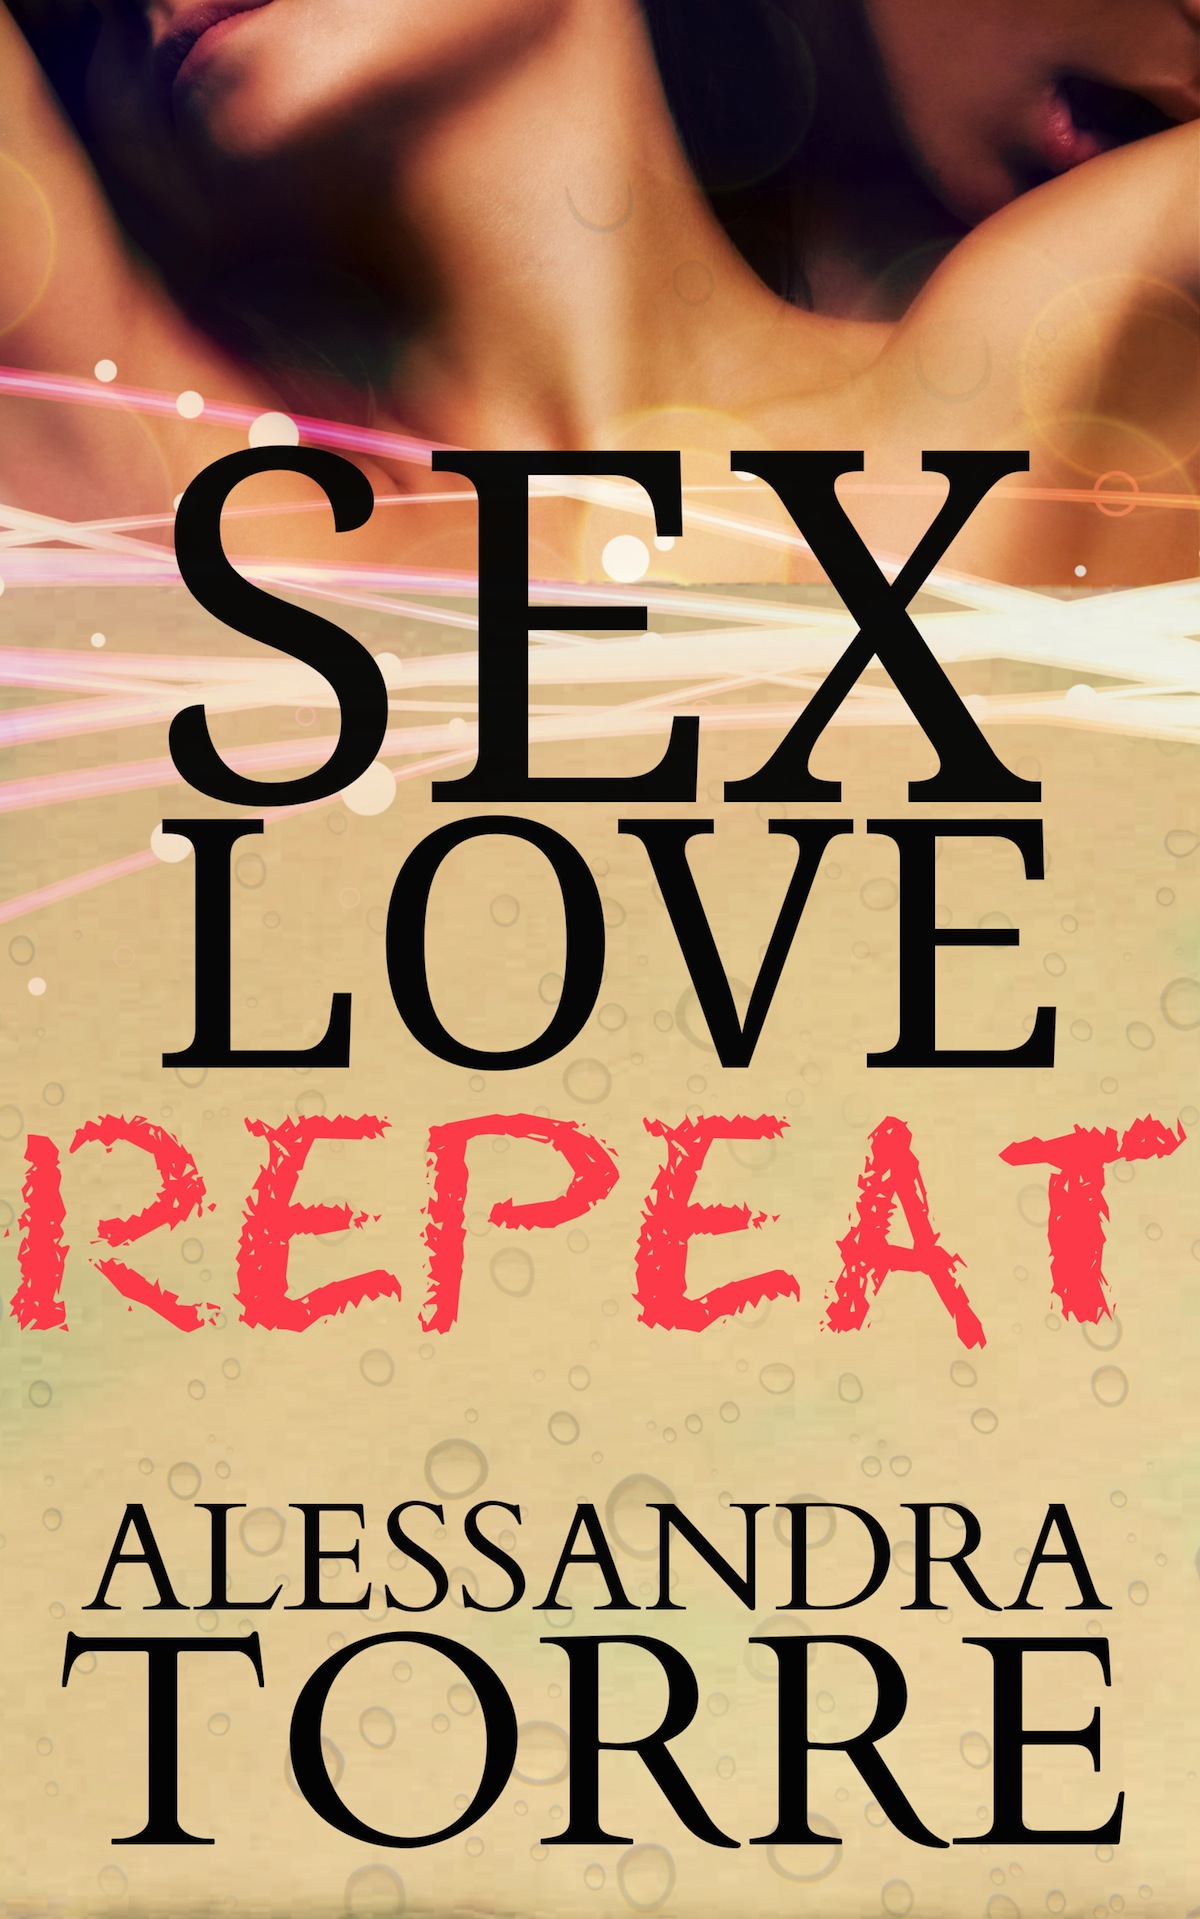 Sex, Love, Repeat with Alessandra Torre 02/07 by Between The Lines Network